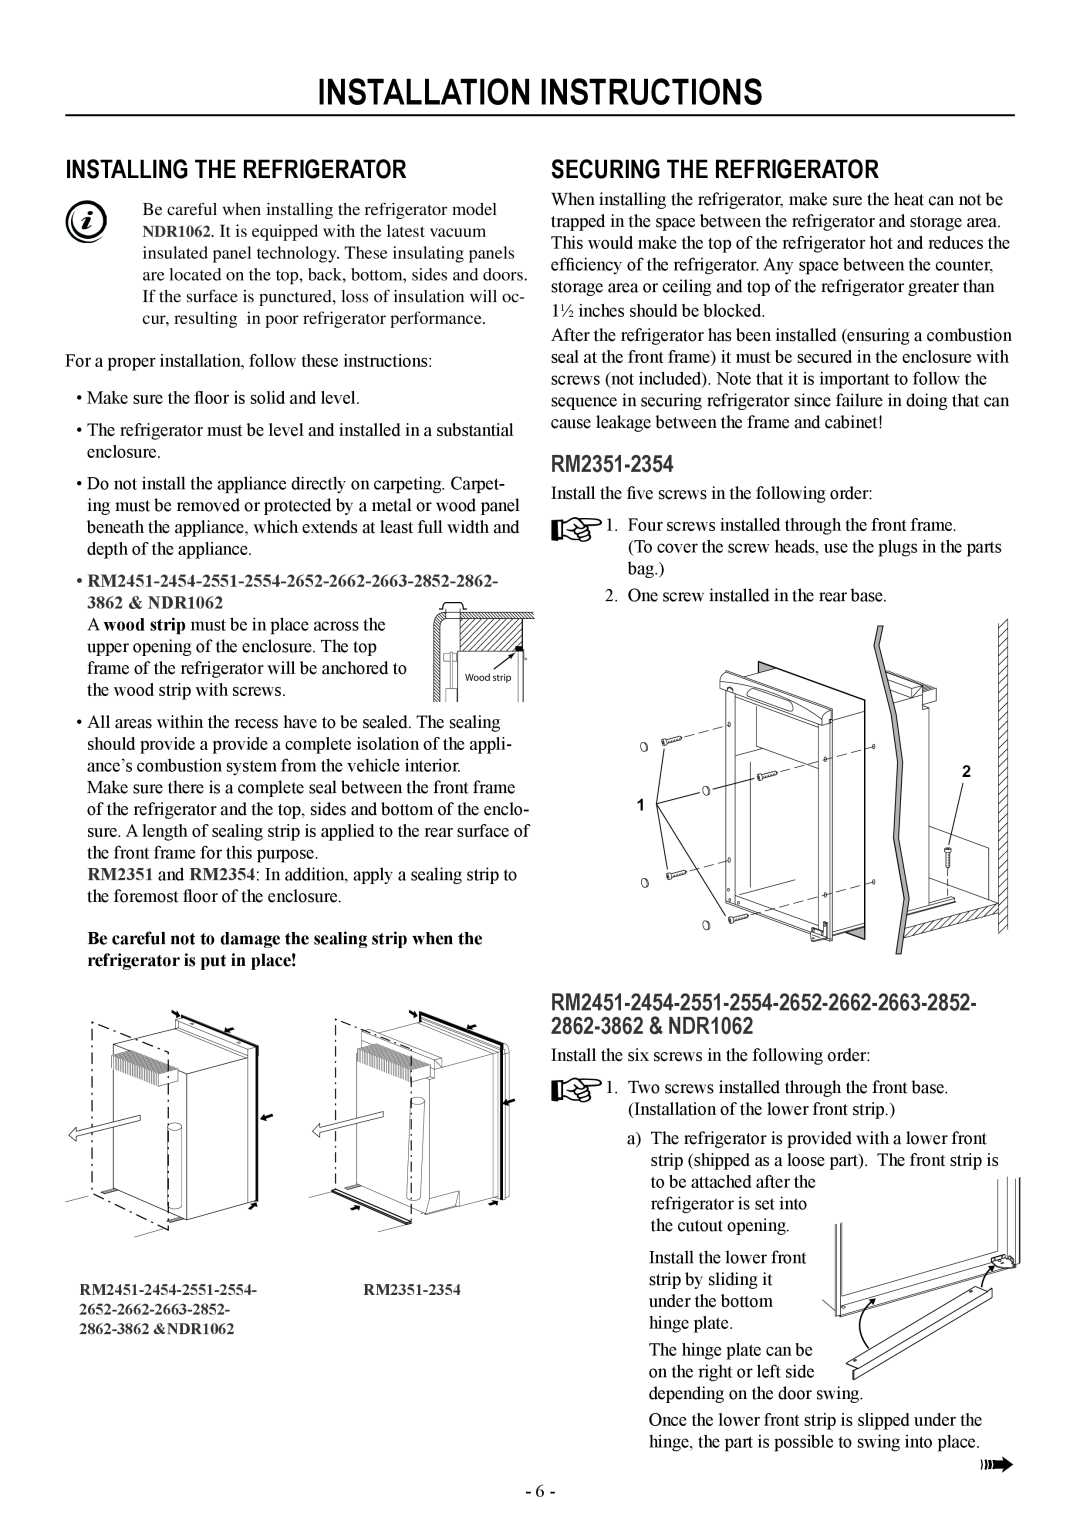 Dometic RM2551, RM2451 Installation Instructions, Installing The Refrigerator, Securing The Refrigerator, RM2351-2354 